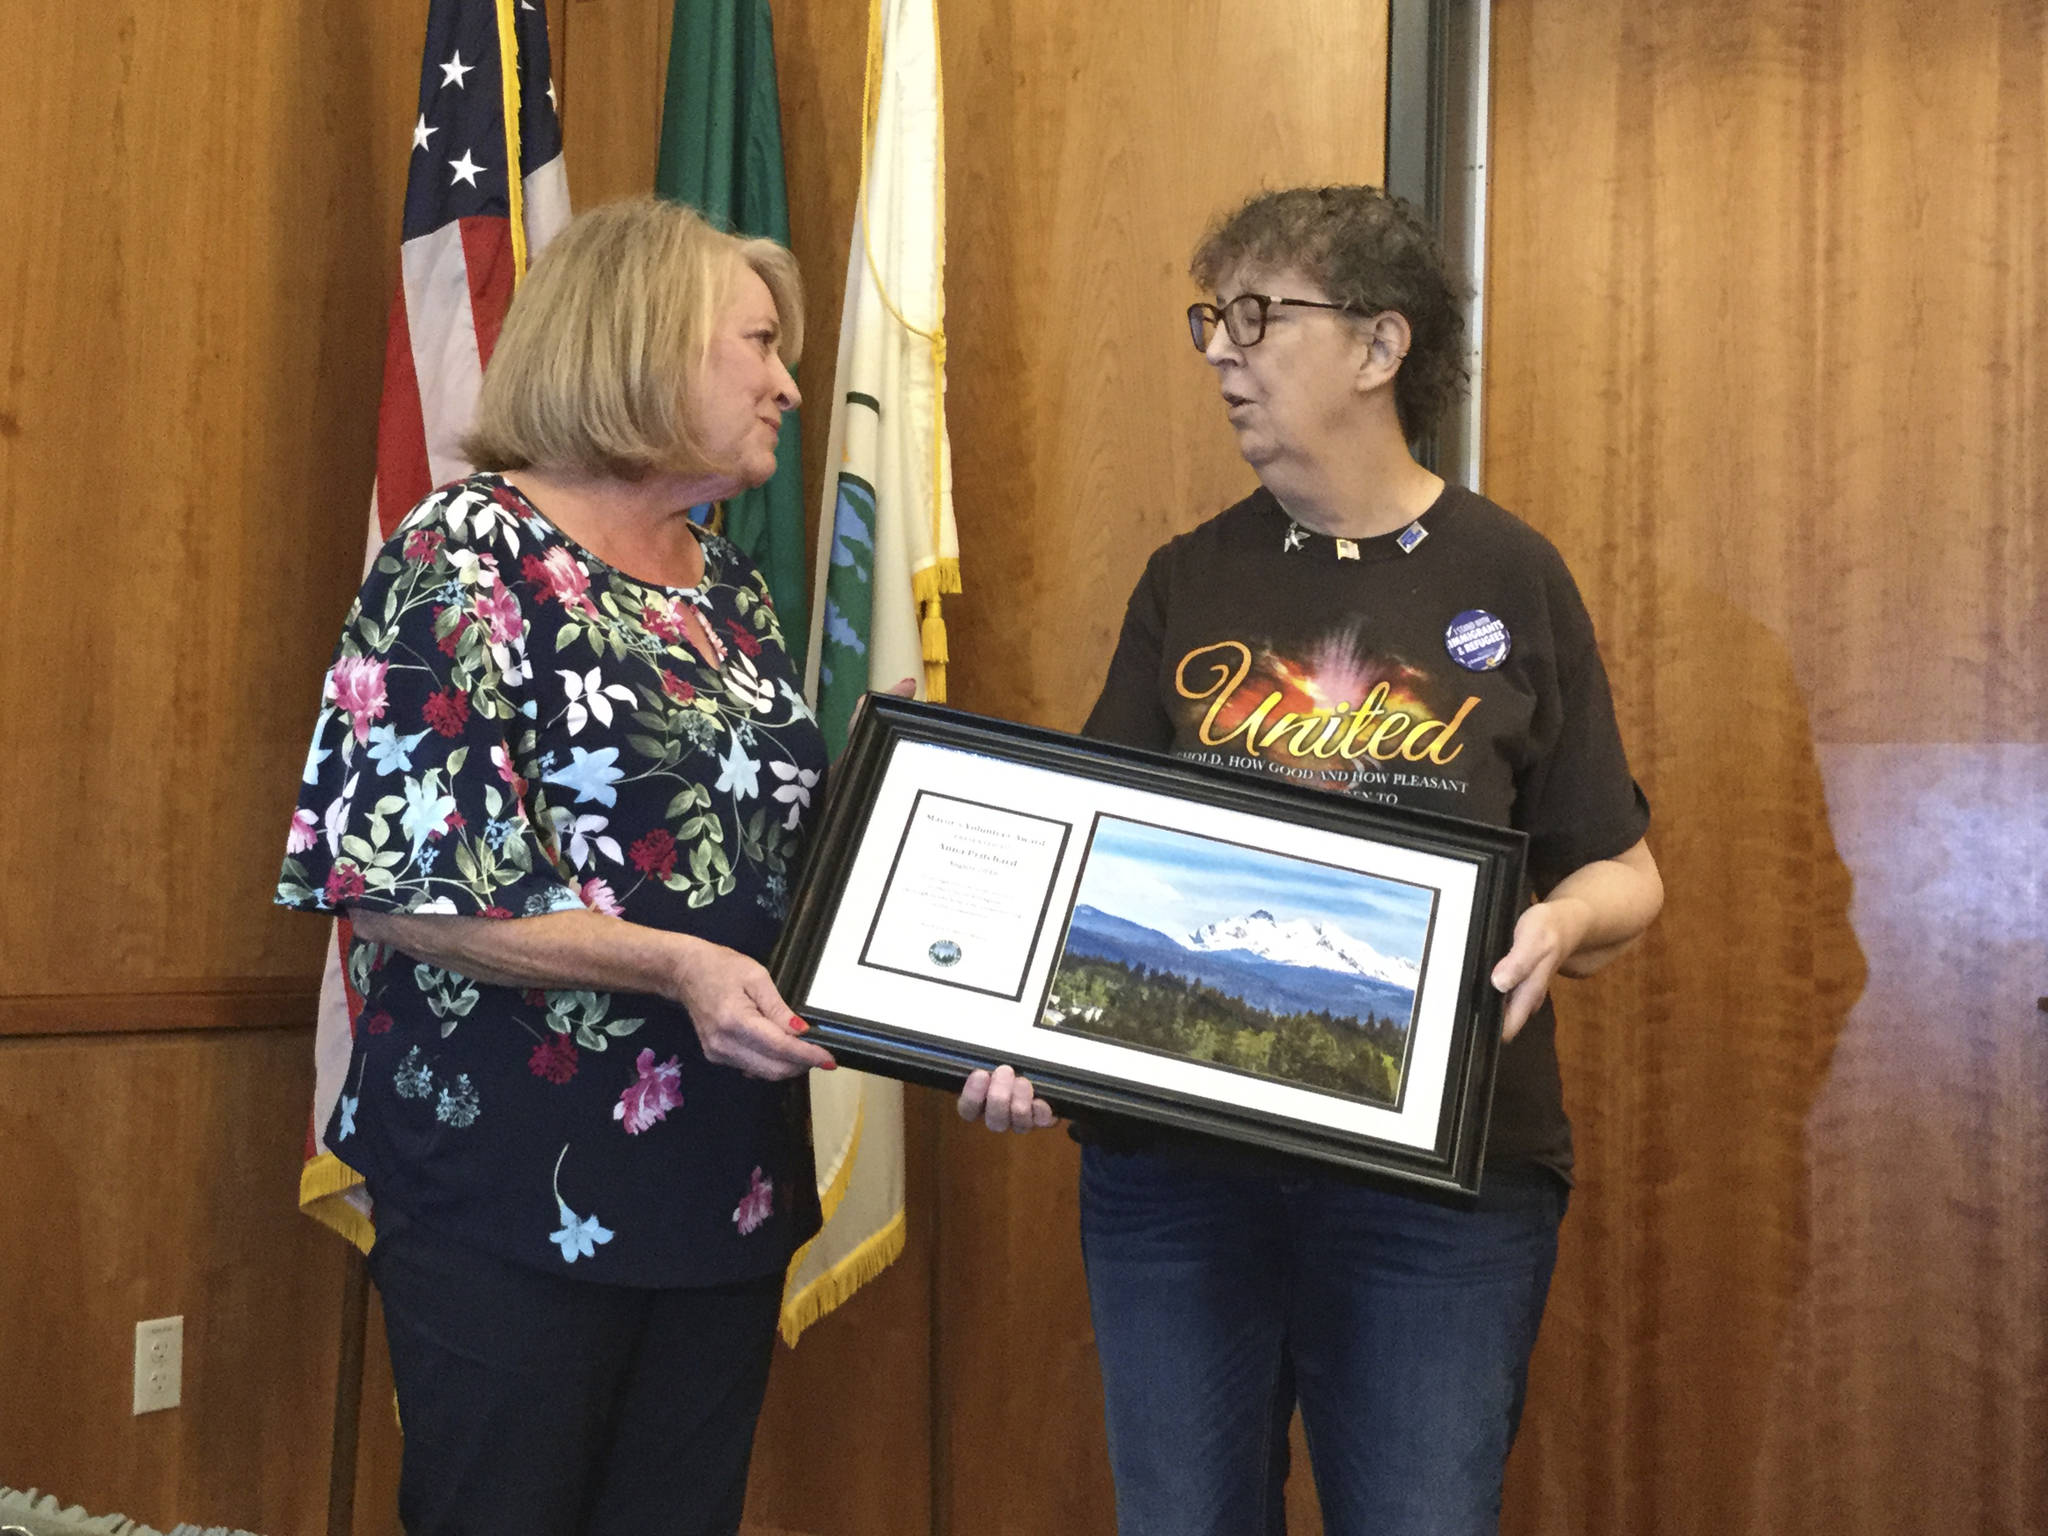 Advocate who works with seniors, mentally ill honored with Mayor’s volunteer award